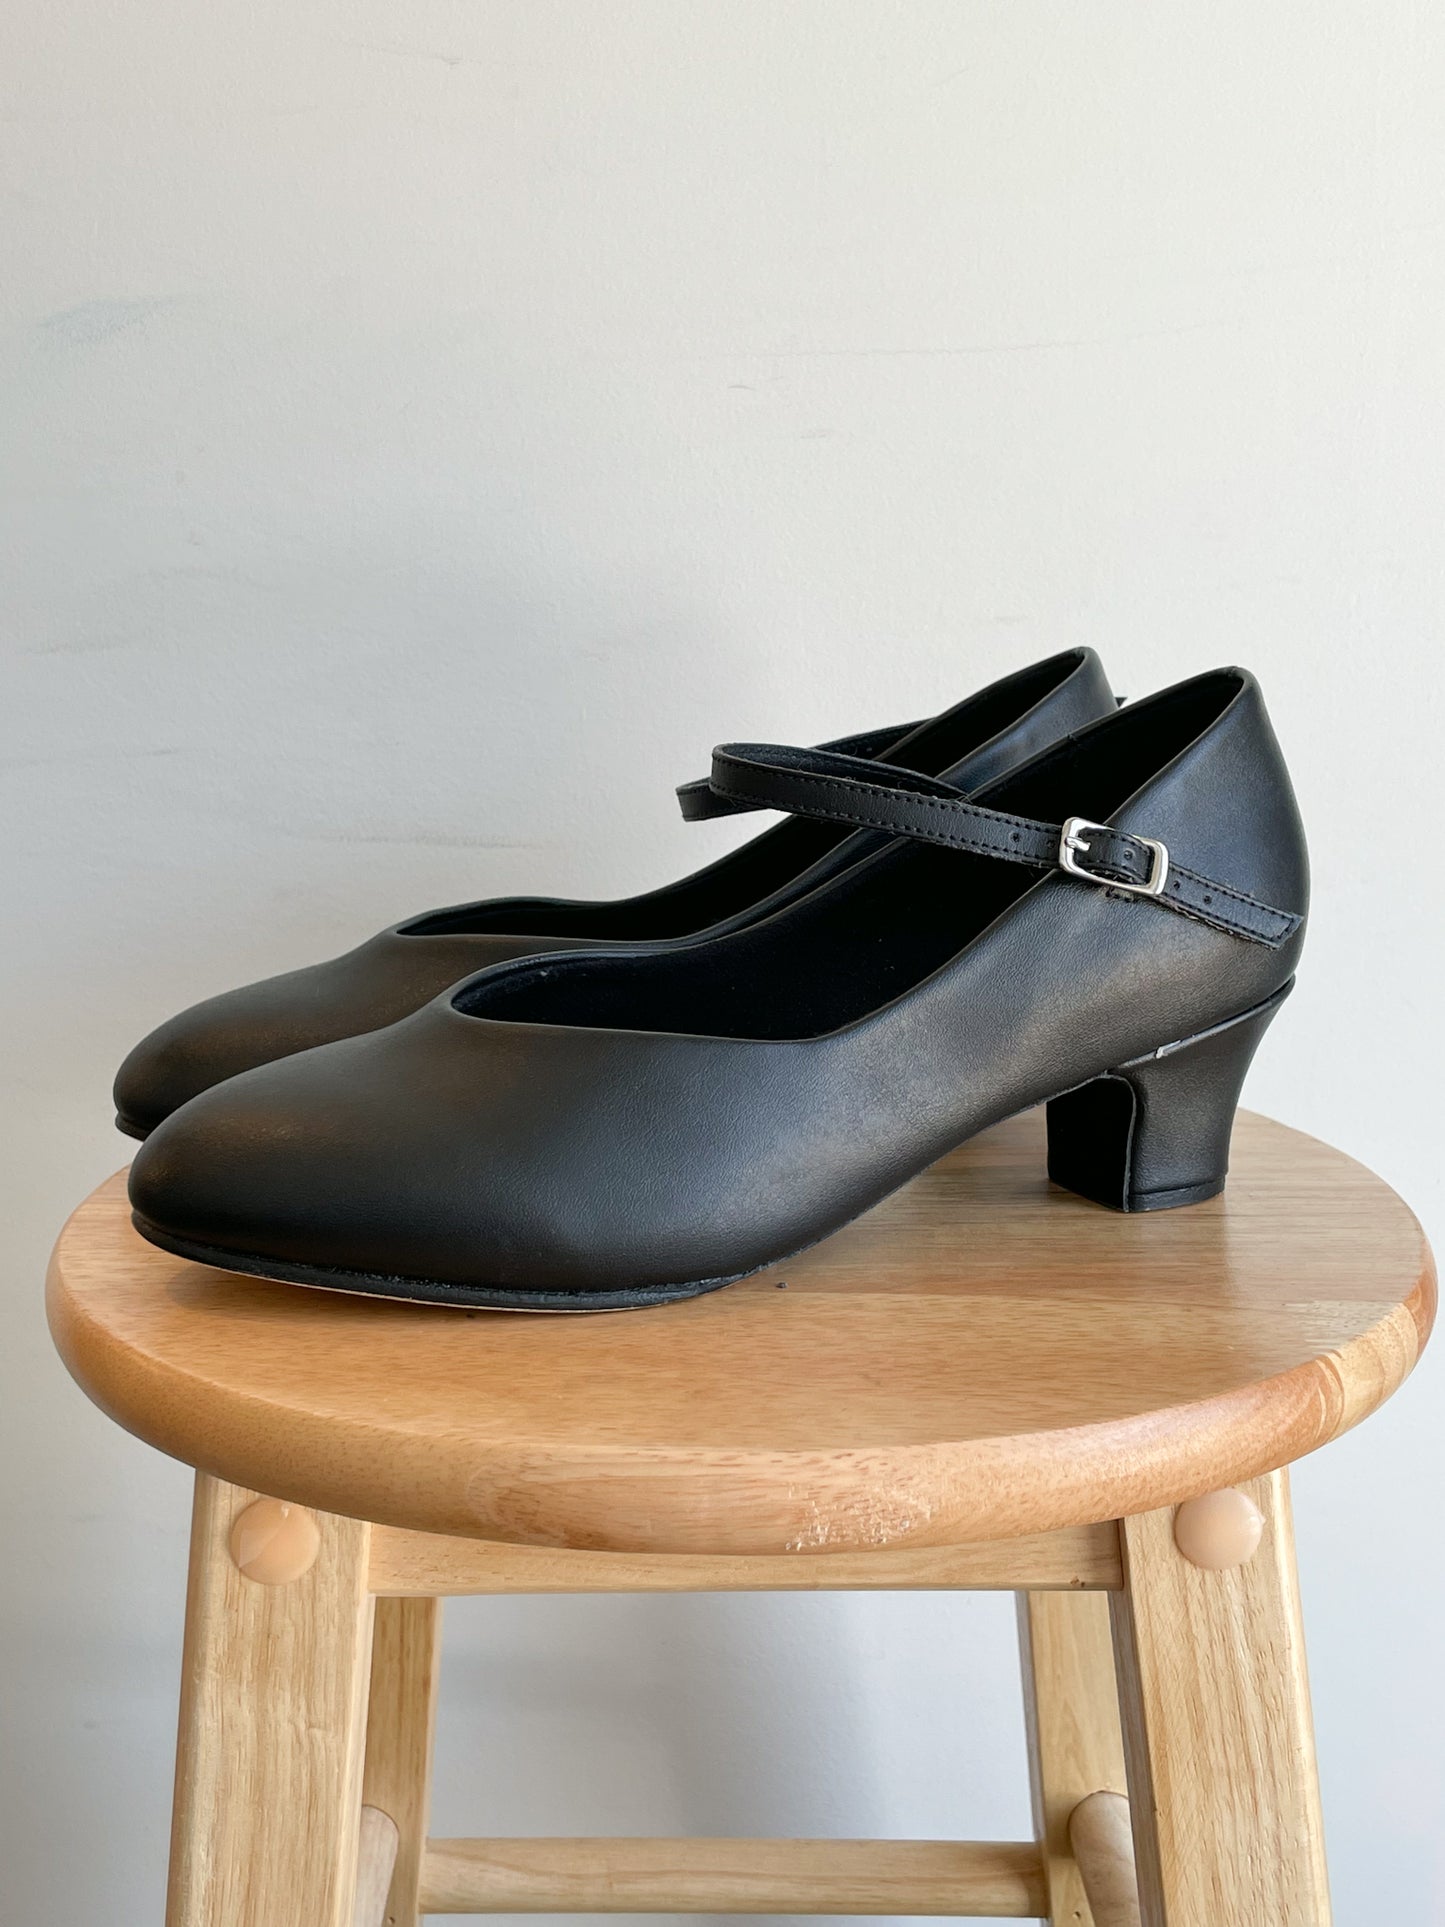 Bloch Black Ballroom Style Genuine Leather Mary Jane Heel with Strap - Size 9